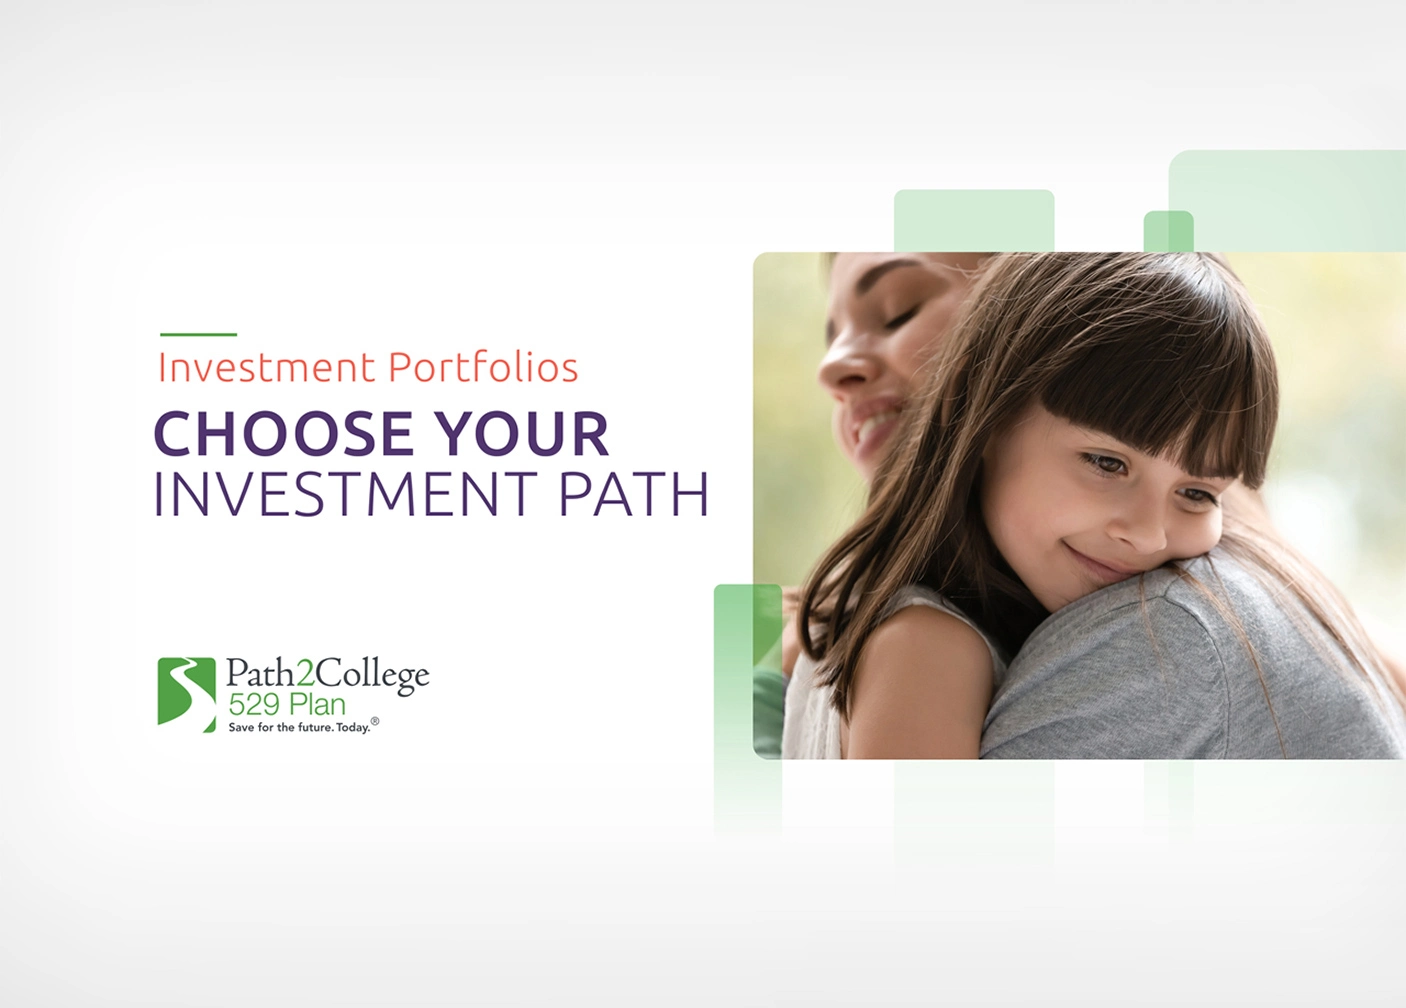 Investment Portfolios | Choose Your Investment Path | Path2College 529 Plan | Save for the future. Today. (registration mark)